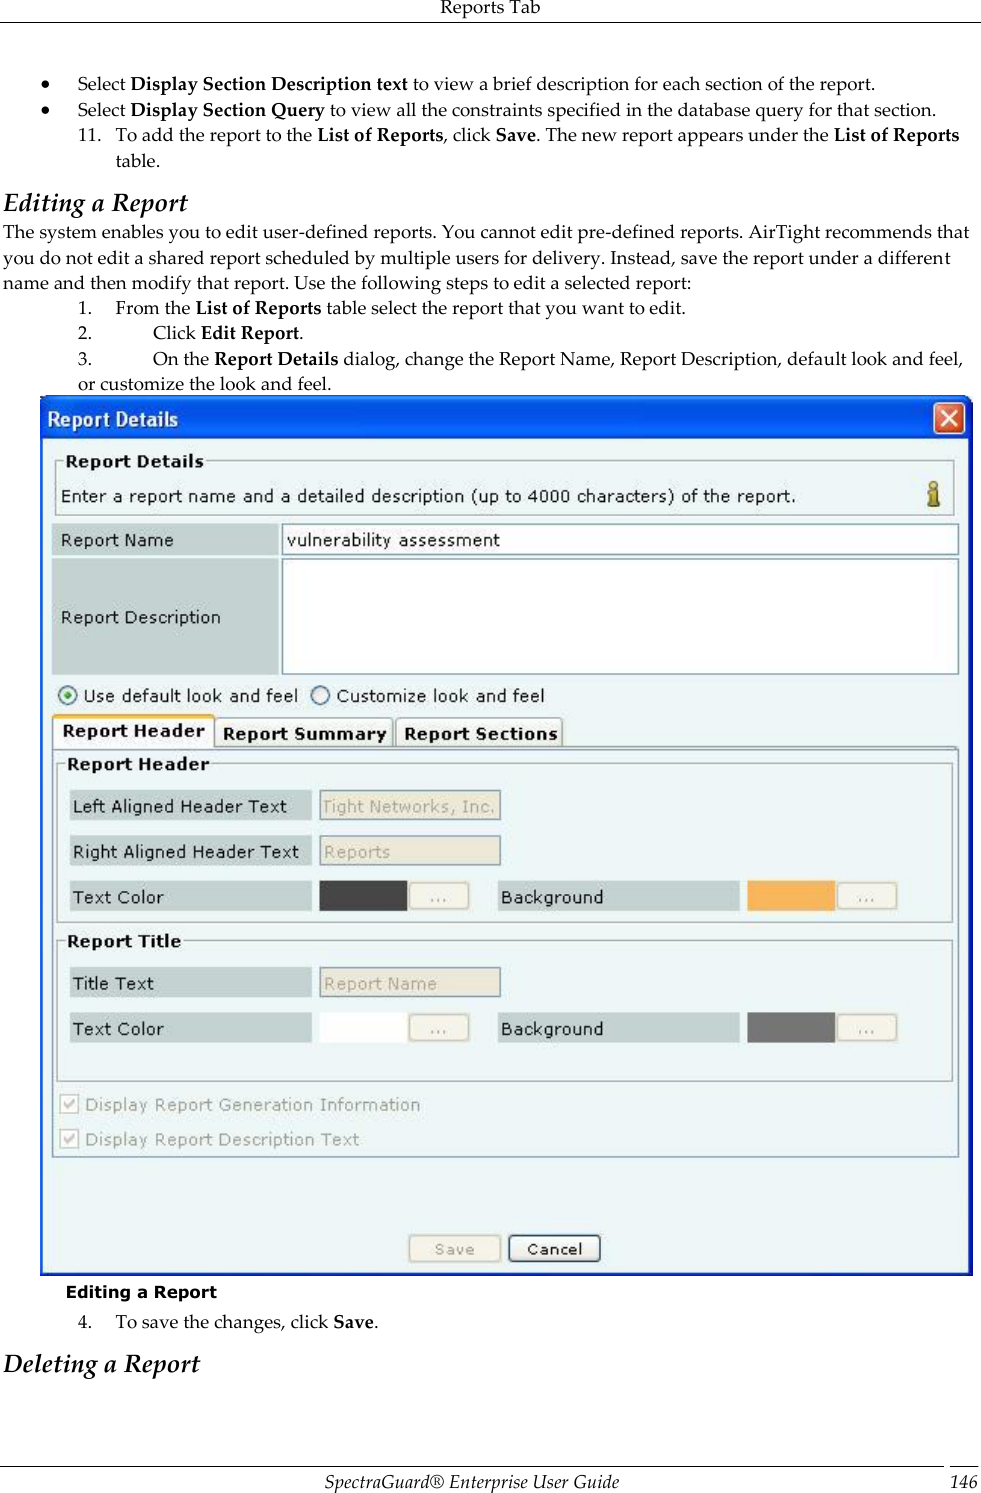 Reports Tab SpectraGuard®  Enterprise User Guide 146  Select Display Section Description text to view a brief description for each section of the report.  Select Display Section Query to view all the constraints specified in the database query for that section. 11. To add the report to the List of Reports, click Save. The new report appears under the List of Reports table. Editing a Report The system enables you to edit user-defined reports. You cannot edit pre-defined reports. AirTight recommends that you do not edit a shared report scheduled by multiple users for delivery. Instead, save the report under a different name and then modify that report. Use the following steps to edit a selected report: 1. From the List of Reports table select the report that you want to edit. 2. Click Edit Report. 3. On the Report Details dialog, change the Report Name, Report Description, default look and feel, or customize the look and feel.  Editing a Report 4. To save the changes, click Save. Deleting a Report 